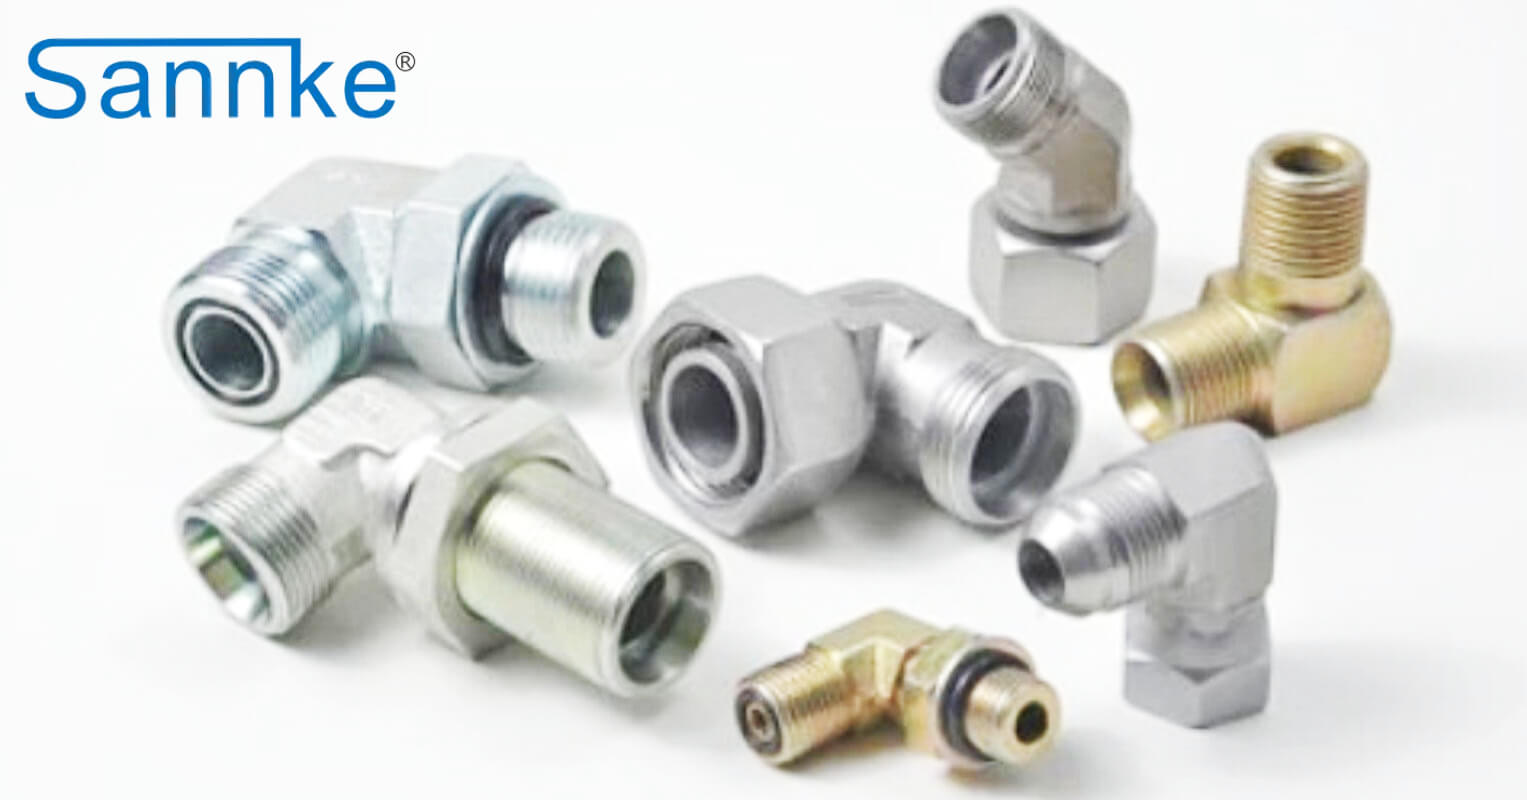 Understanding the Significance of 90 Degree Hydraulic Fittings